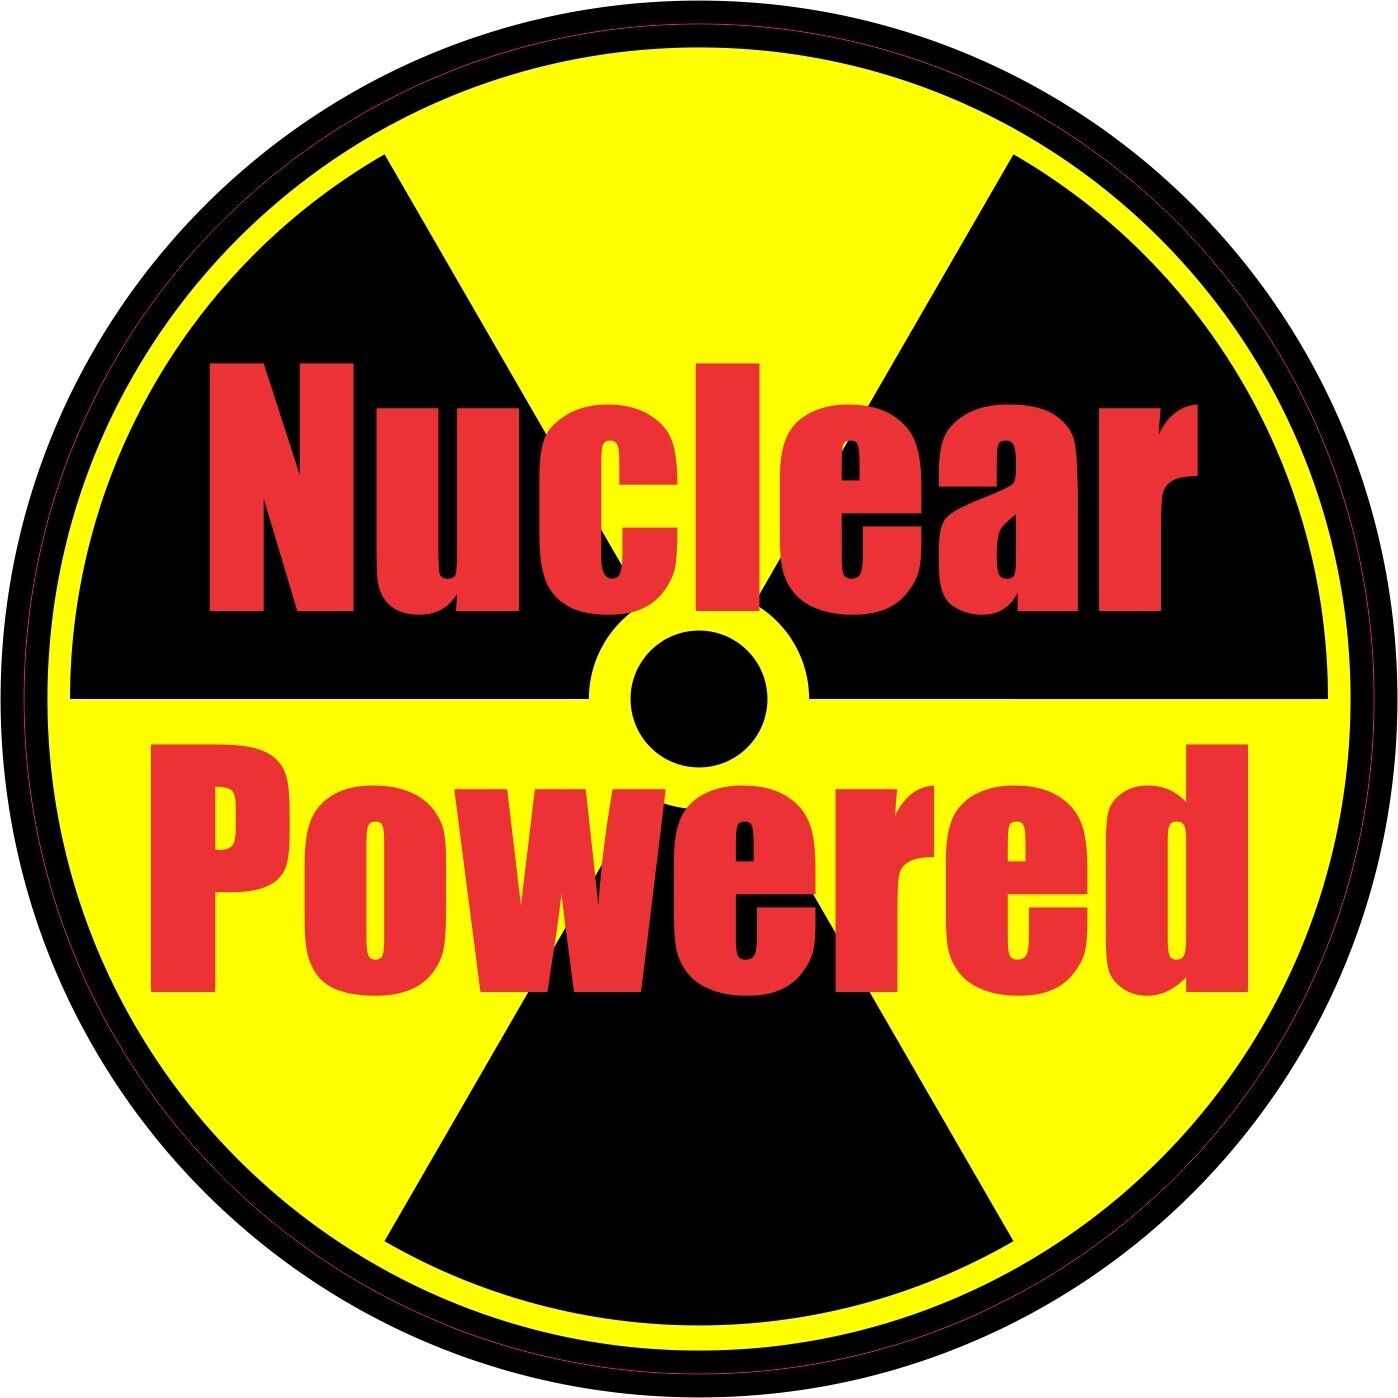 4.5in x 4.5in Nuclear Powered Radioactive Bumper Sticker Decal Car Stickers D...